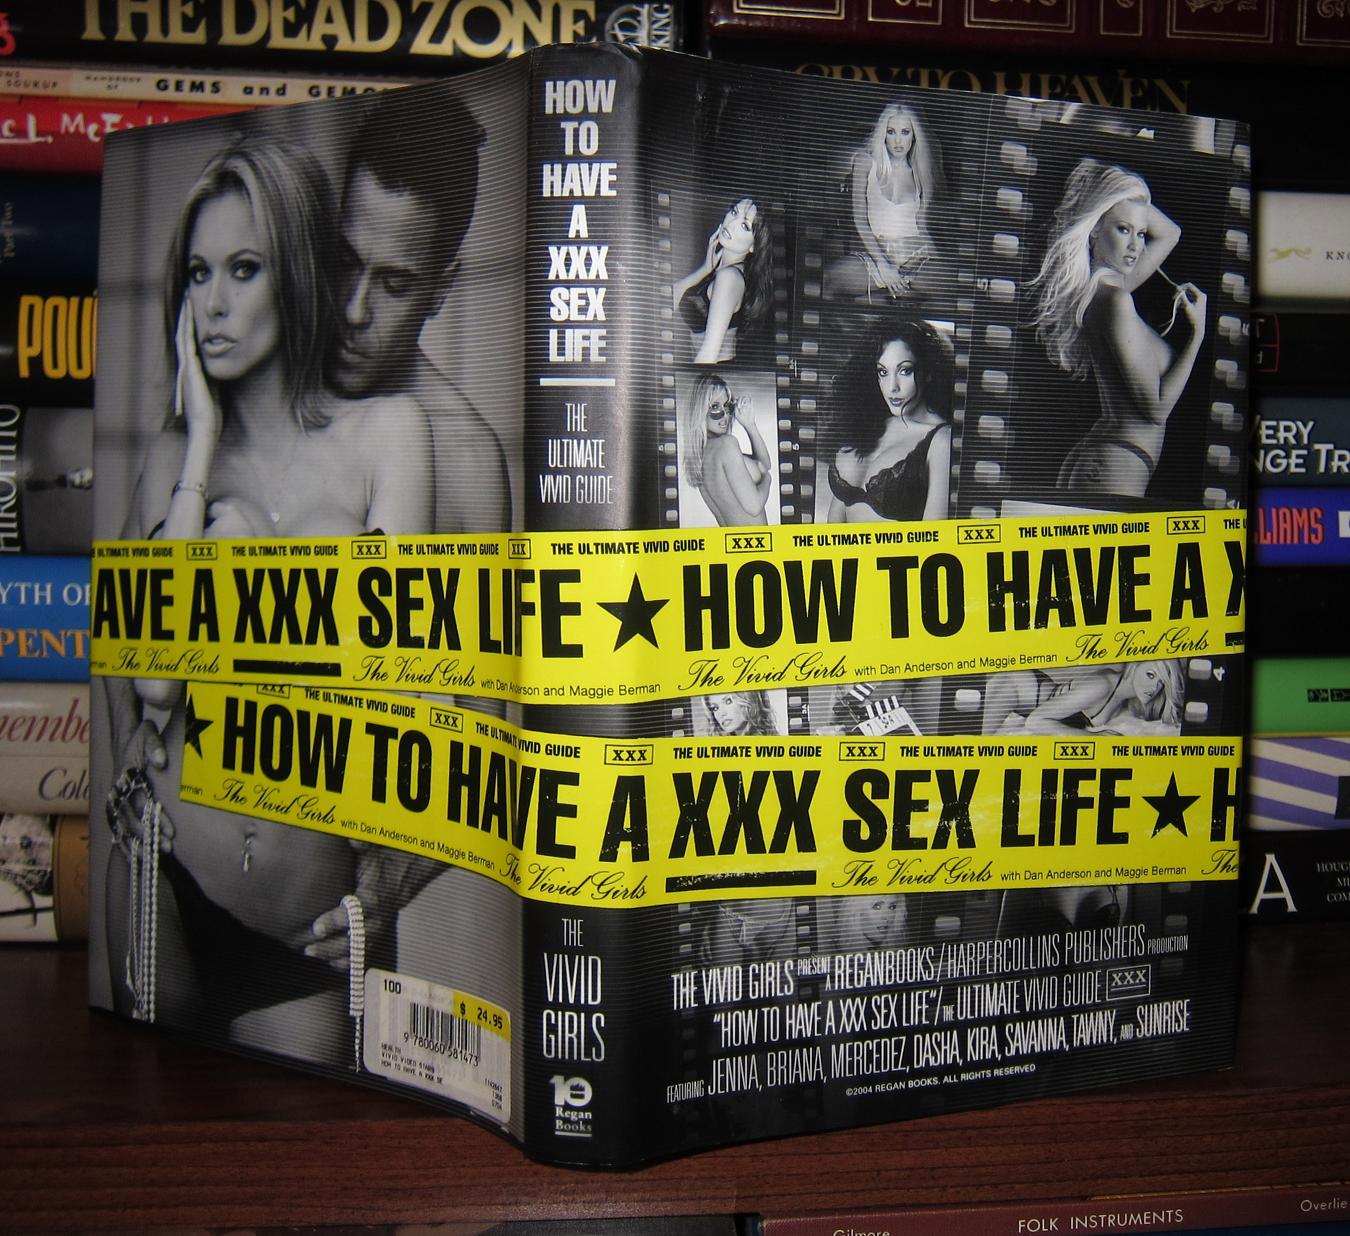 HOW TO HAVE A XXX SEX LIFE The Ultimate Vivid Guide Vivid Girls First Edition; First Printing photo